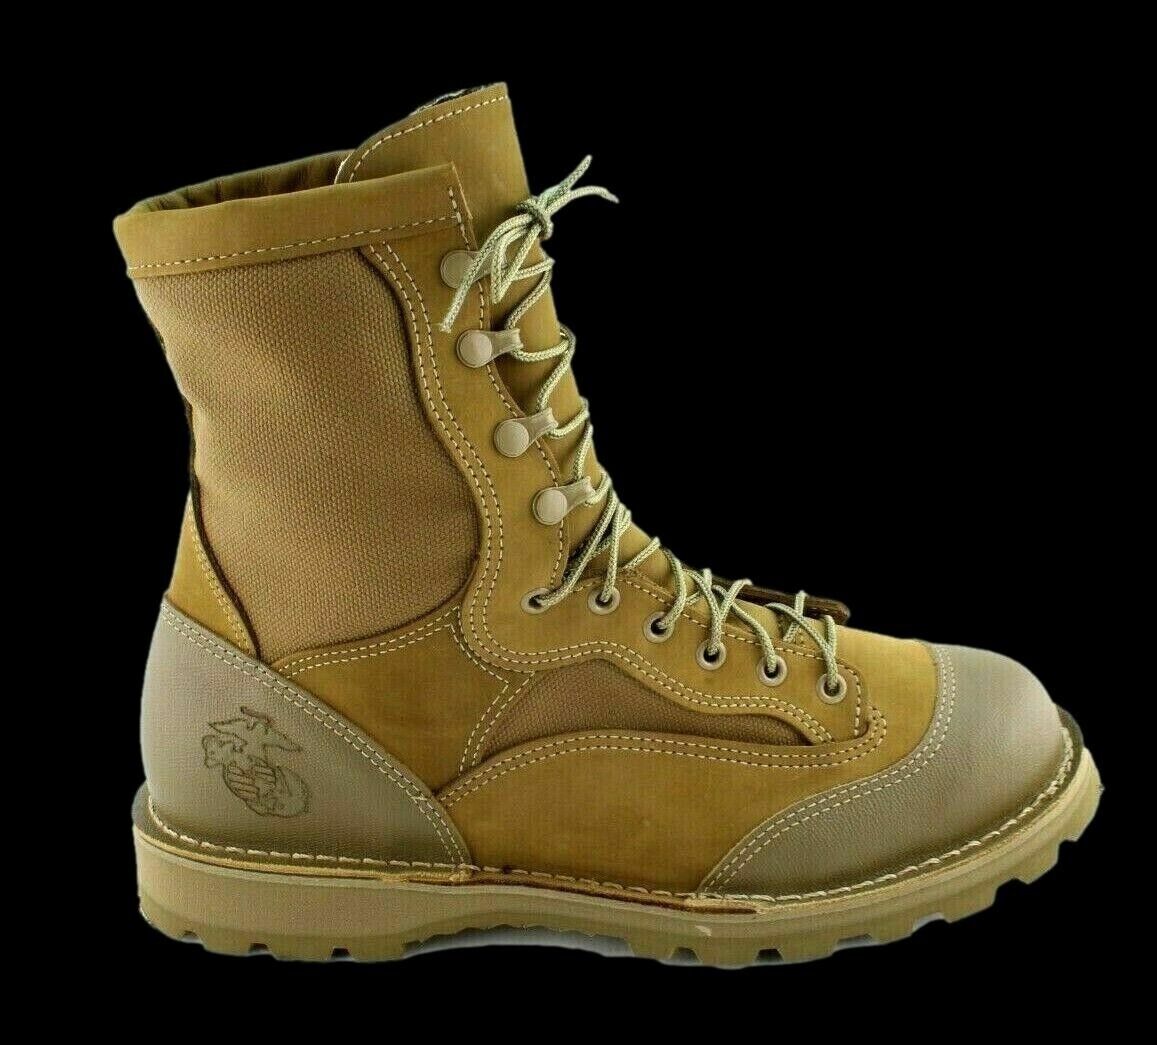 DANNER USMC RAT GORE-TEX BOOT TEMPERATE WEATHER MILITARY ISSUE NEW USA MADE